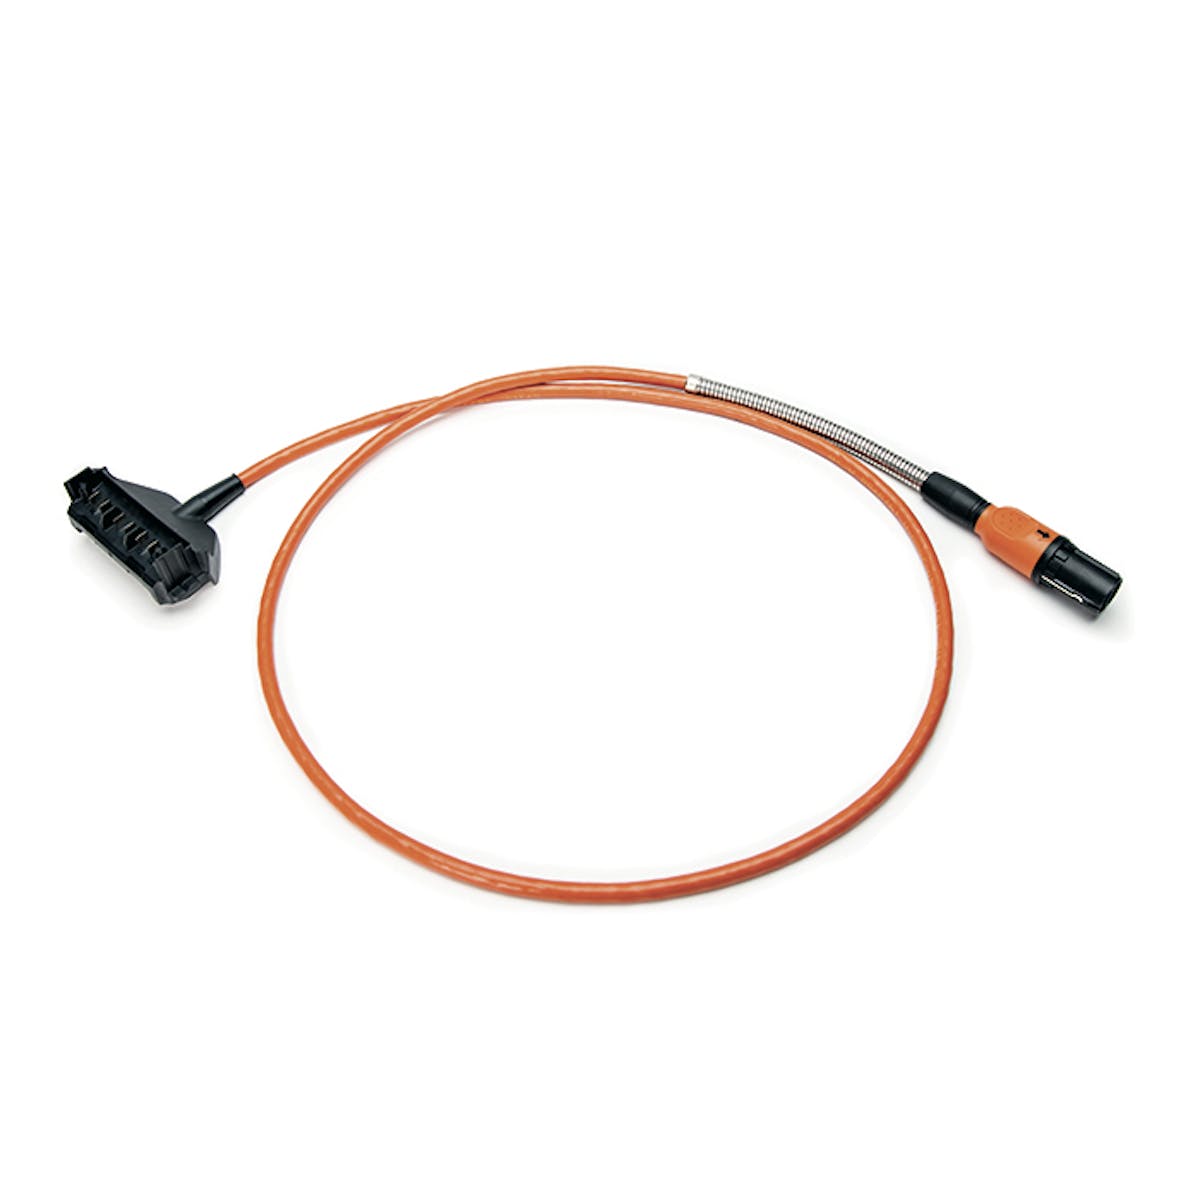 AR 2000 L and AR 3000 L Connecting Cable